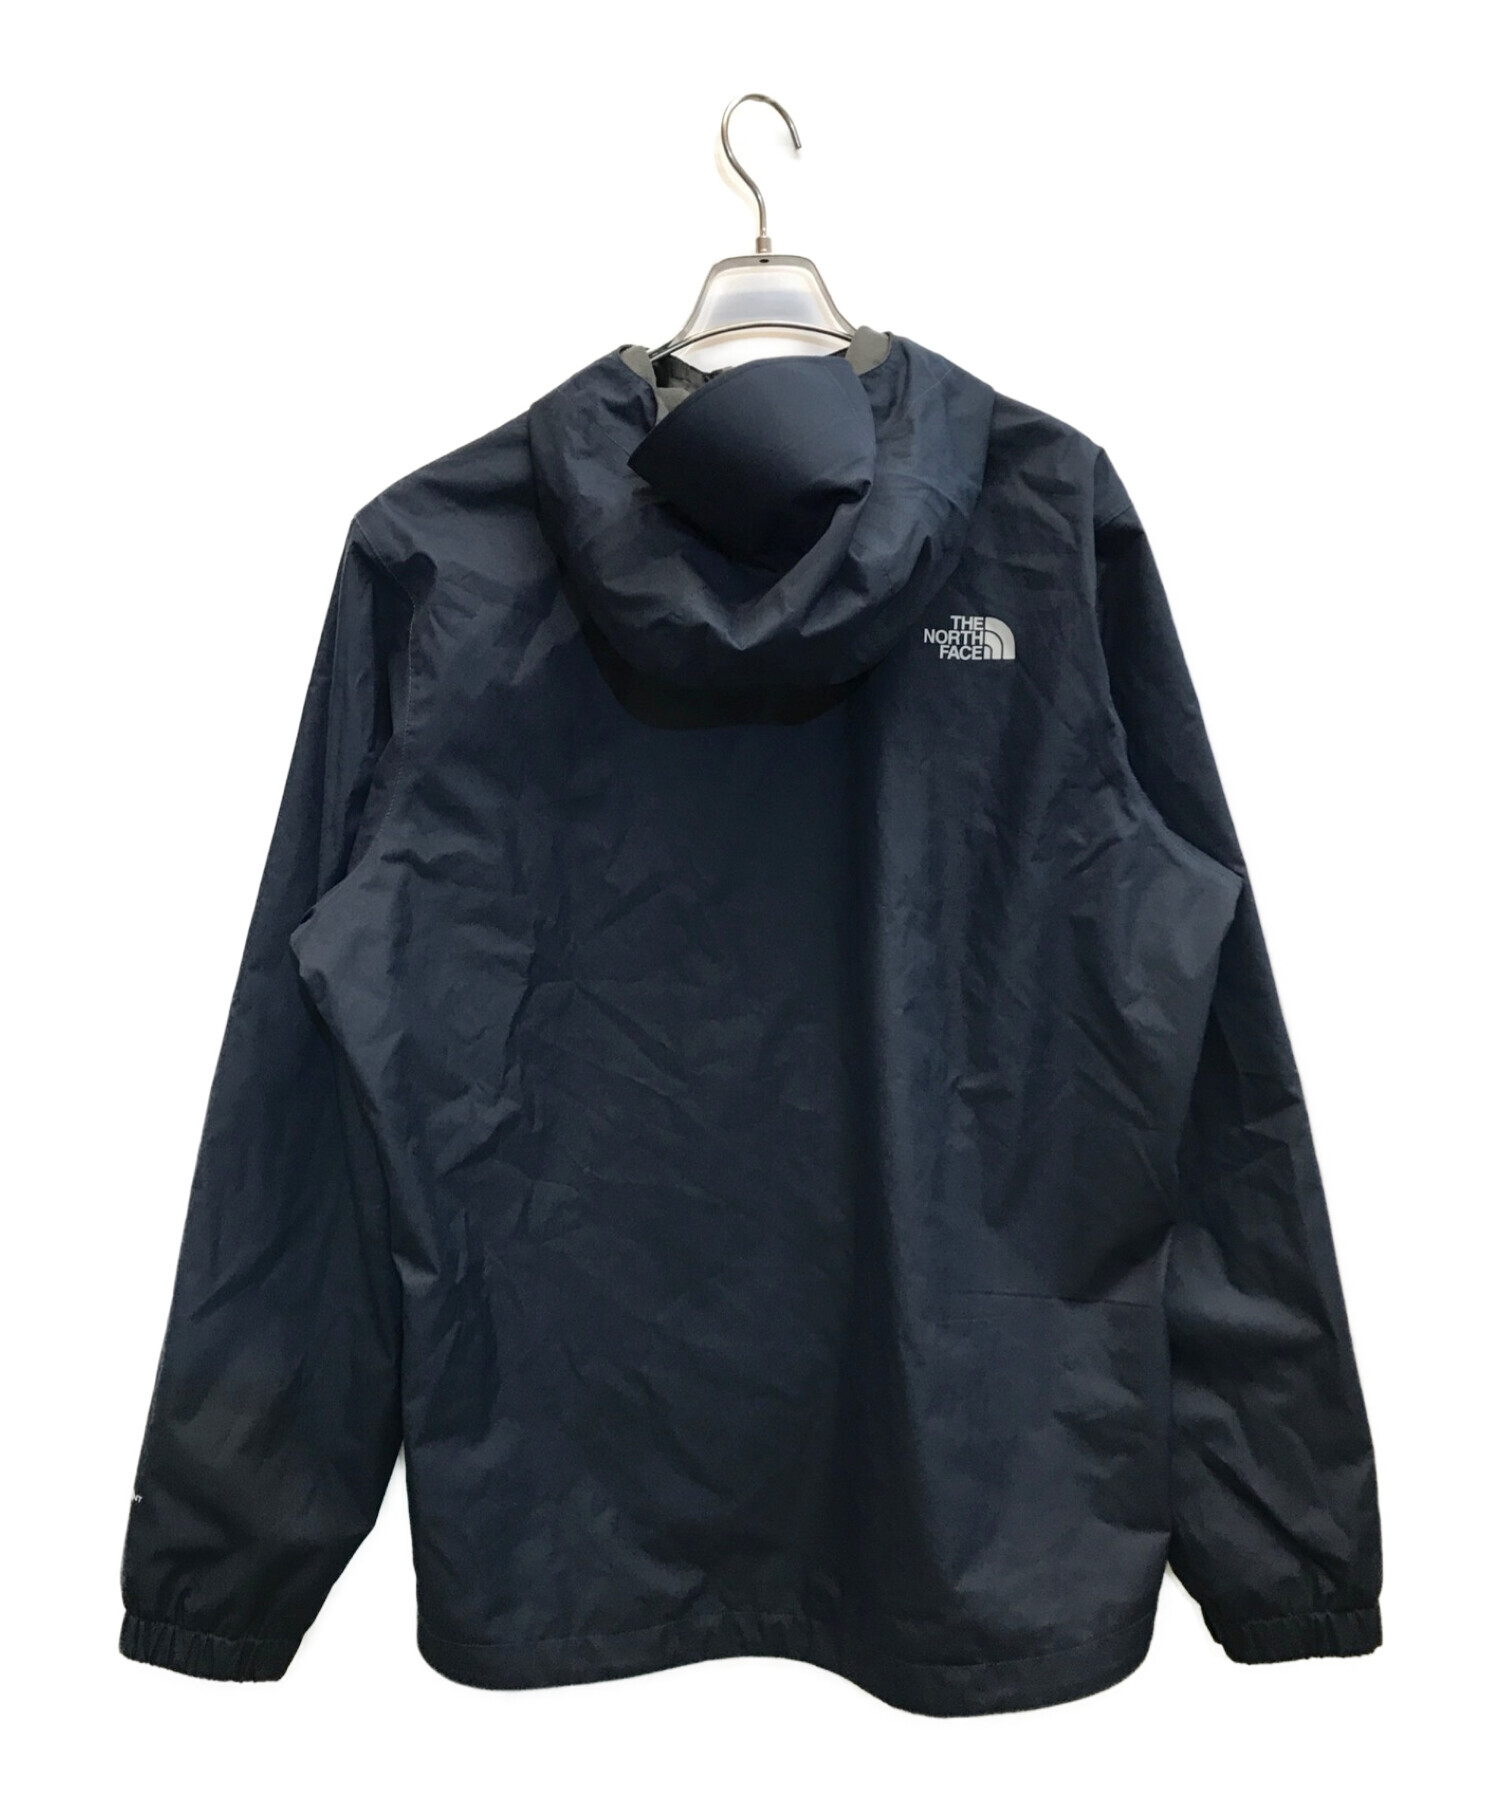 THE NORTH FACE  QUEST JACKET NAVY L